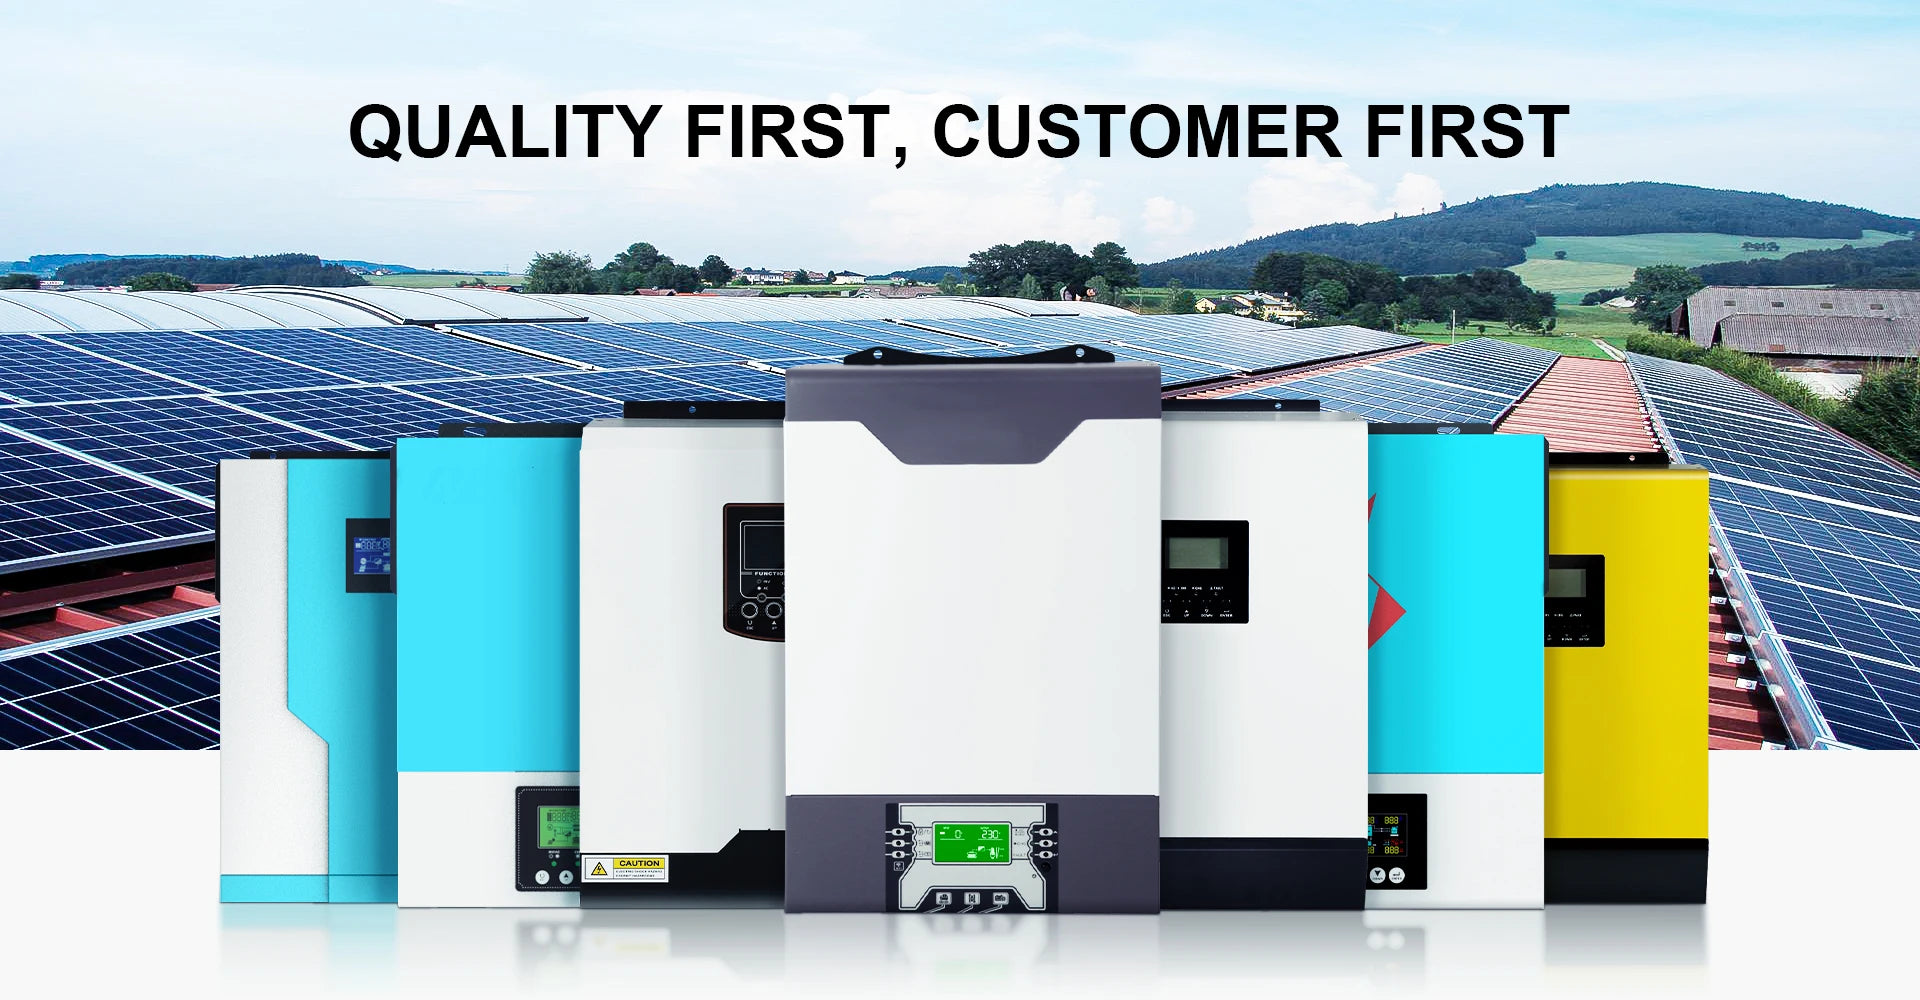 Daxtromn 3000W Solar Inverter, Optimal solar energy conversion with quality and customer satisfaction guaranteed, powered by Daxtromn.